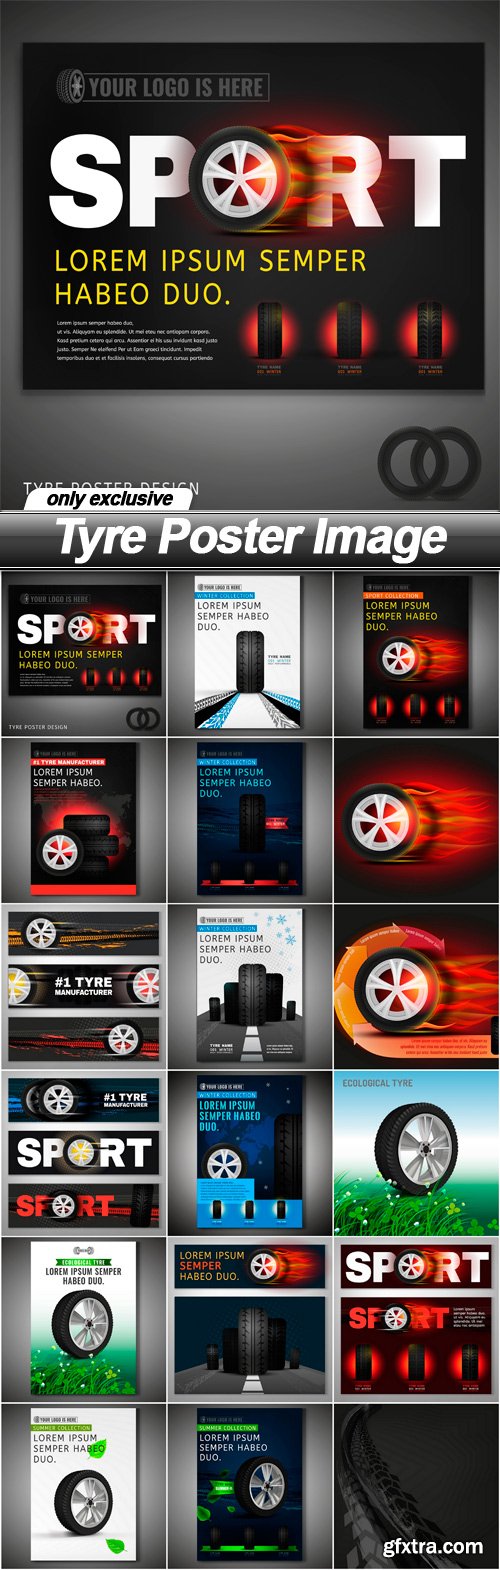 Tyre Poster Image - 18 EPS